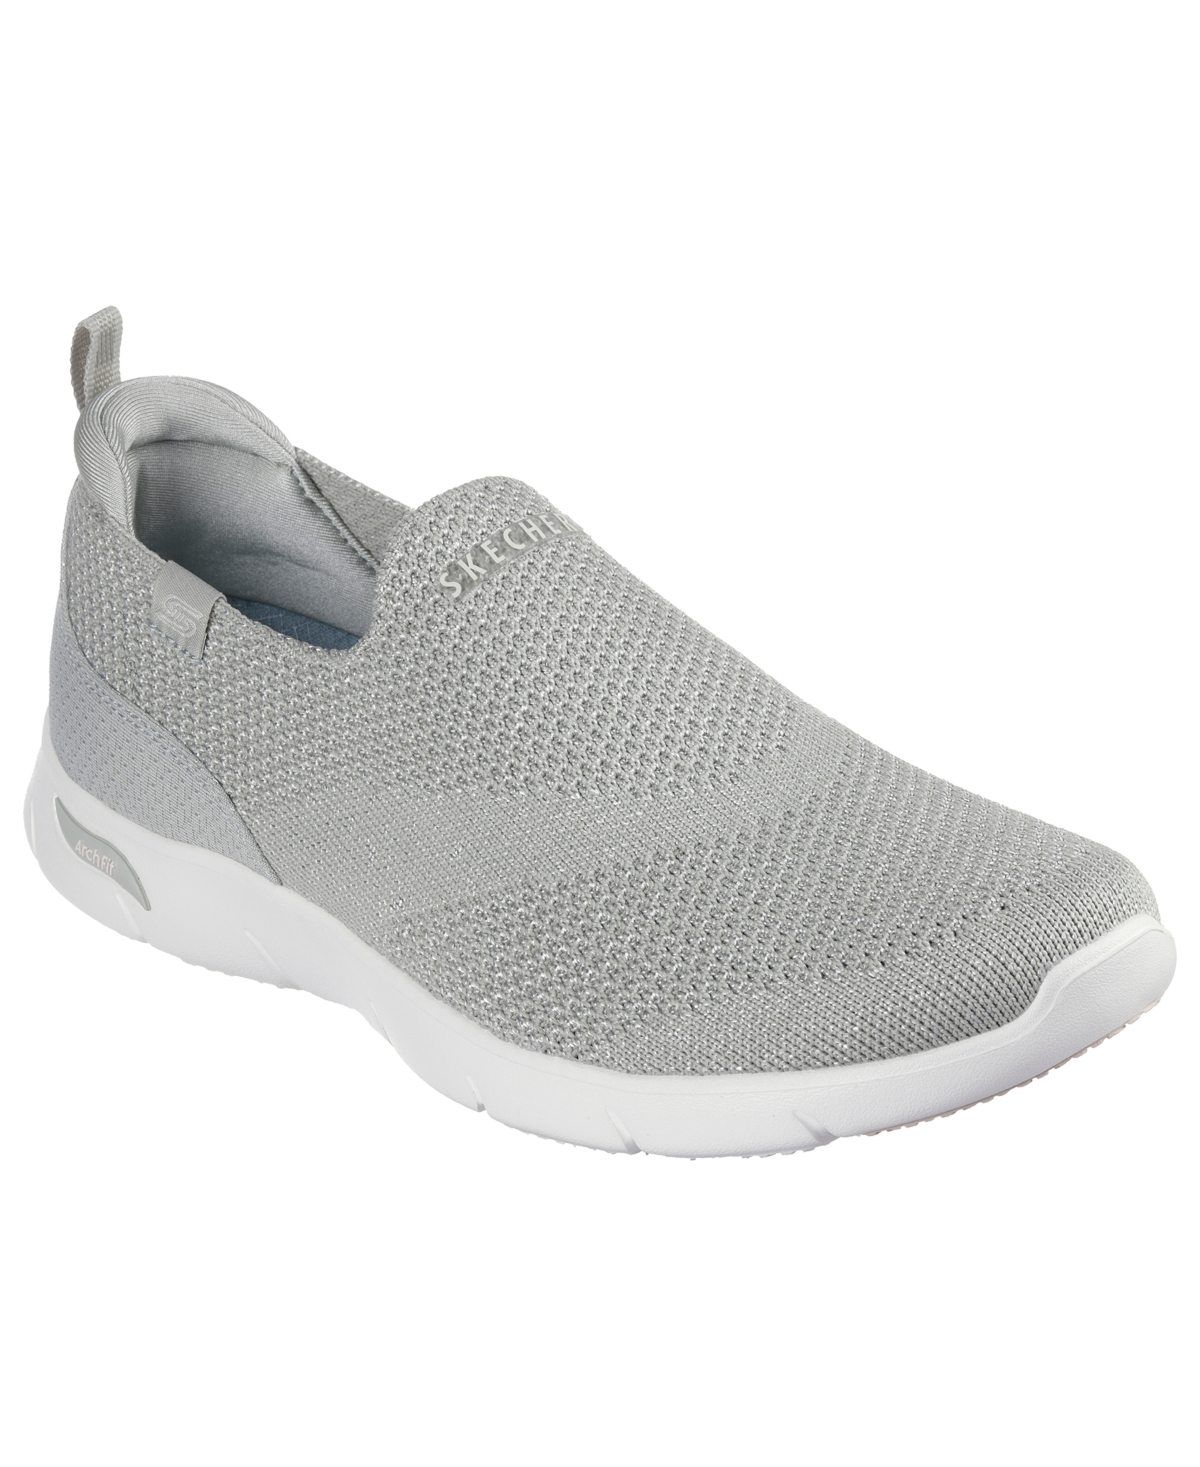 Women's Arch Fit Refine - Iris Slip-On Casual Sneakers from Finish Line - Grey